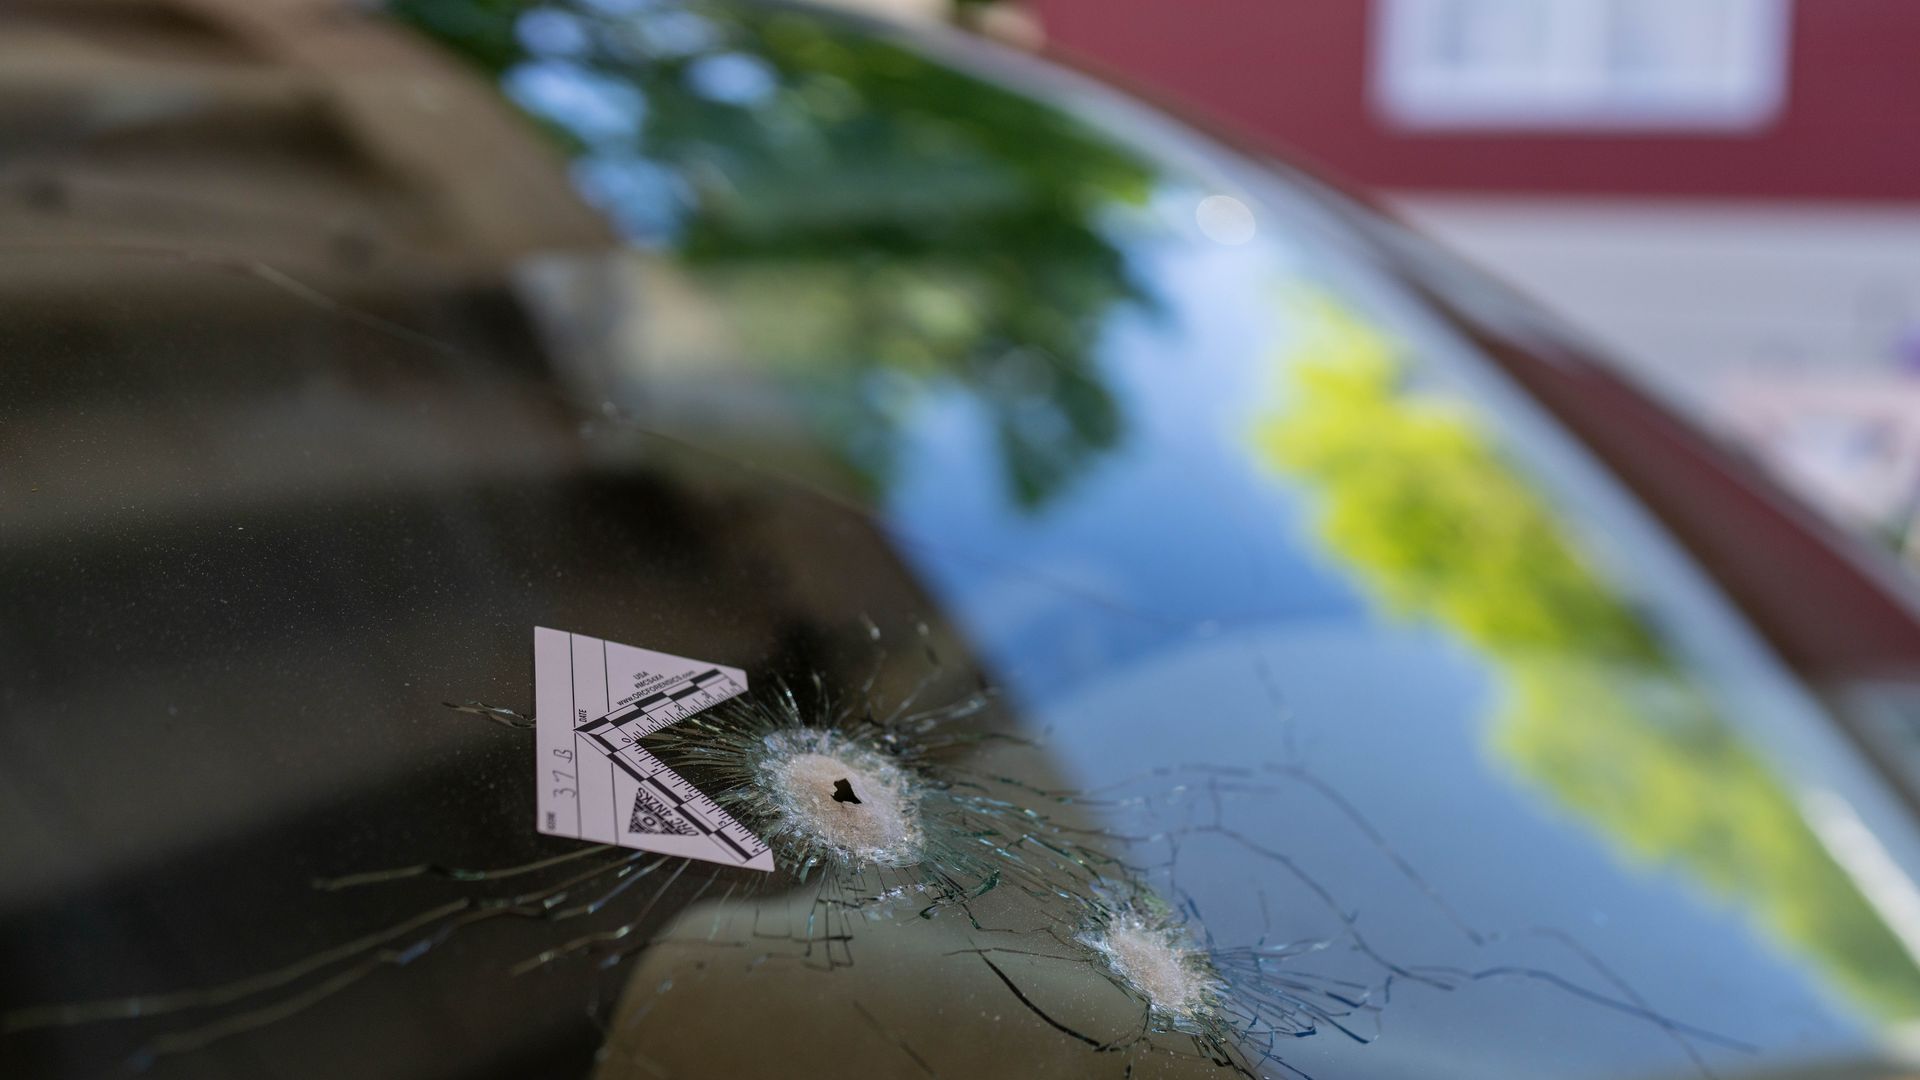 A bullet hole with an evidence marker, which went through a rear window of a car parked across the street where a gunman was shooting at random people on N Dustin Avenue on May 16, 2023 in Farmington, New Mexico. 